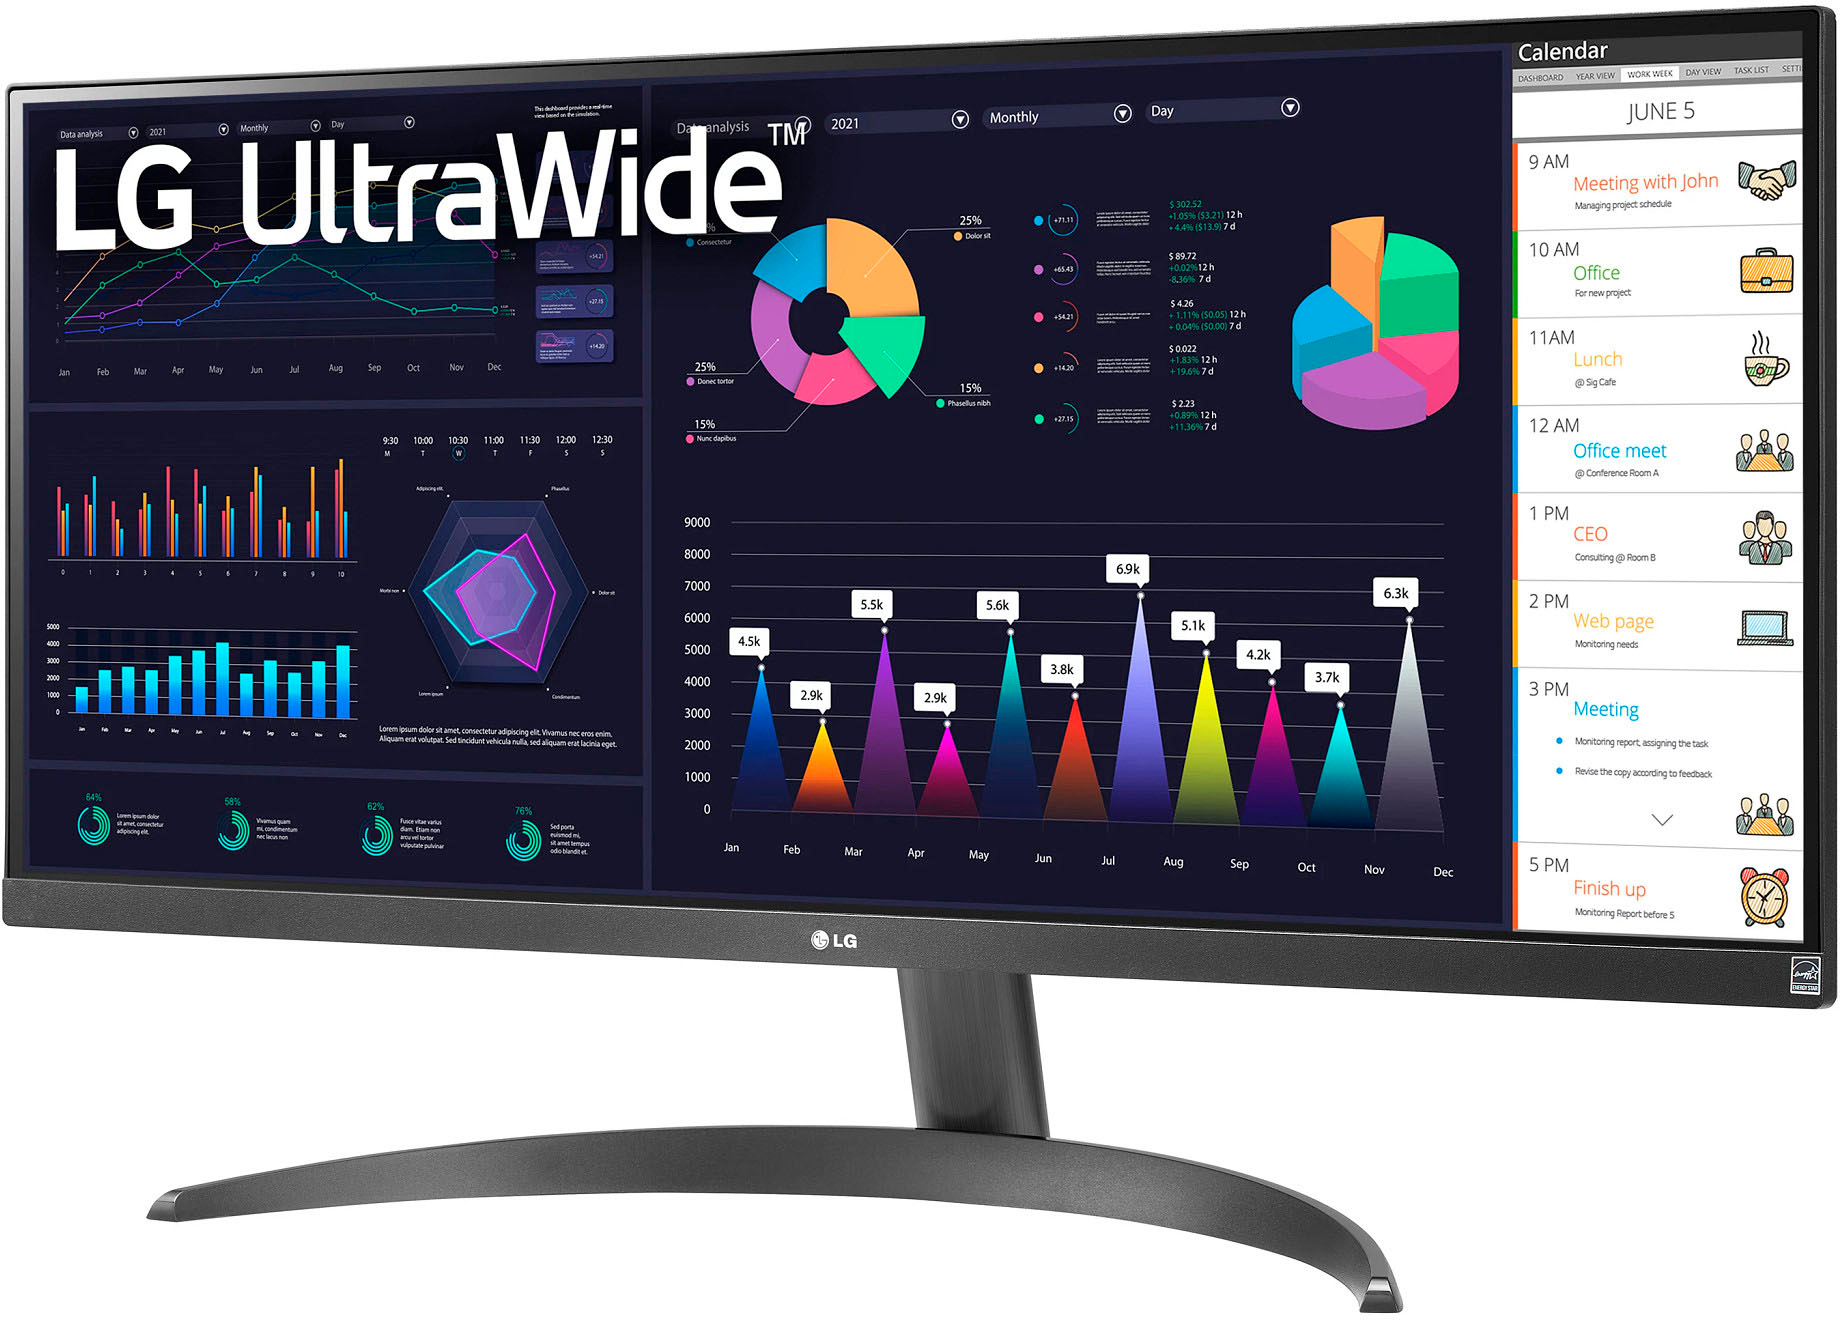 29 UltraWide FHD HDR FreeSync Monitor with USB Type-C